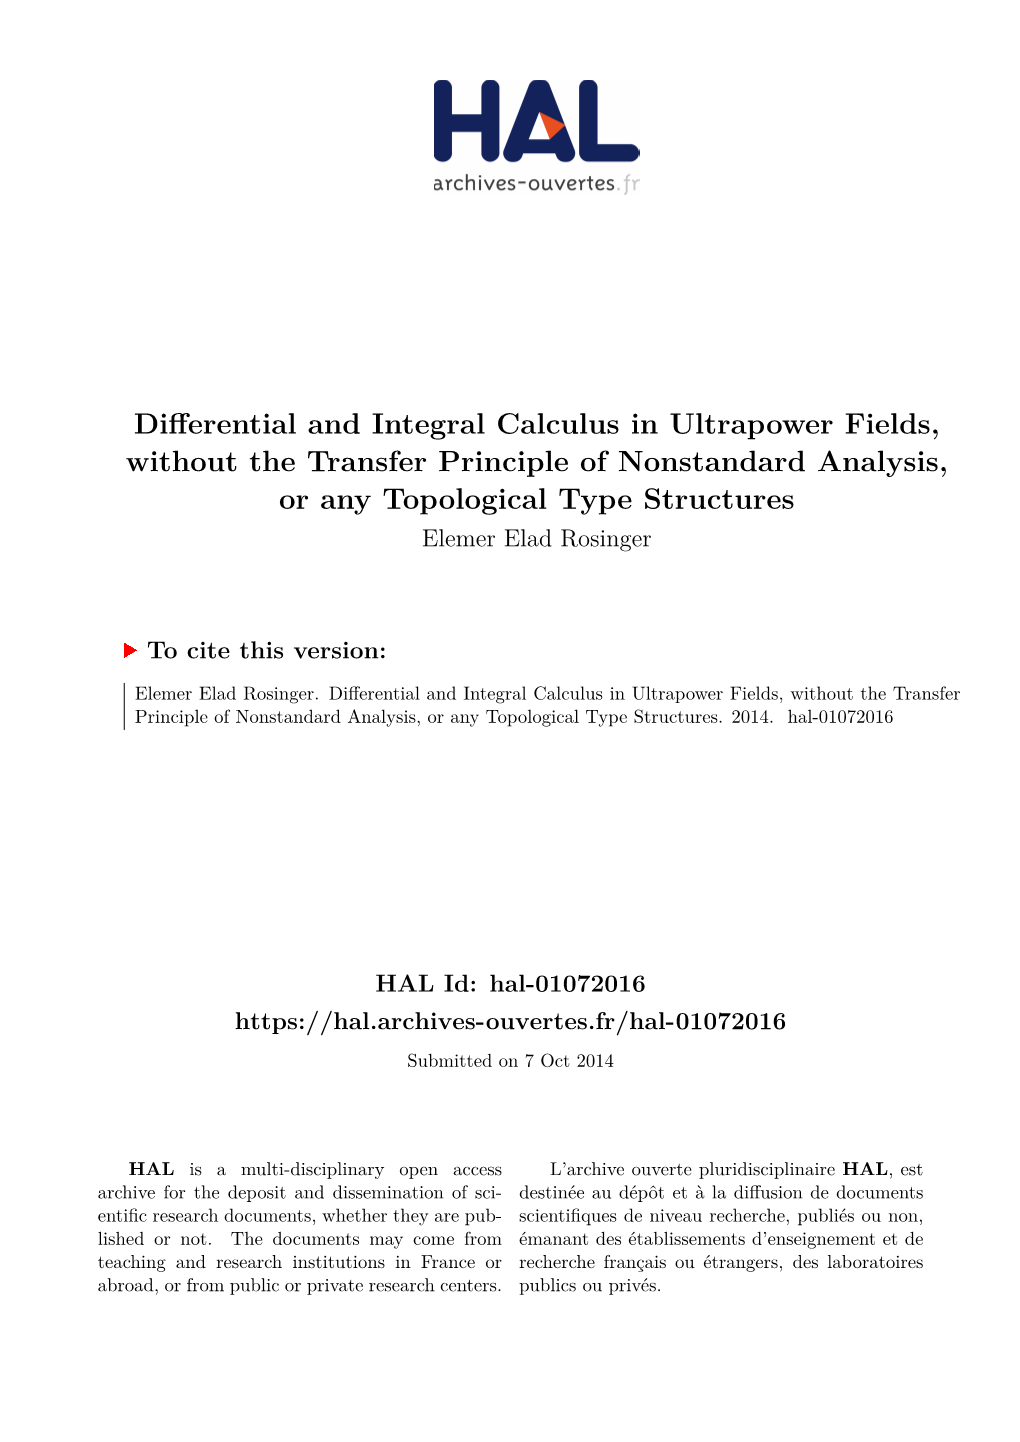 Differential and Integral Calculus in Ultrapower